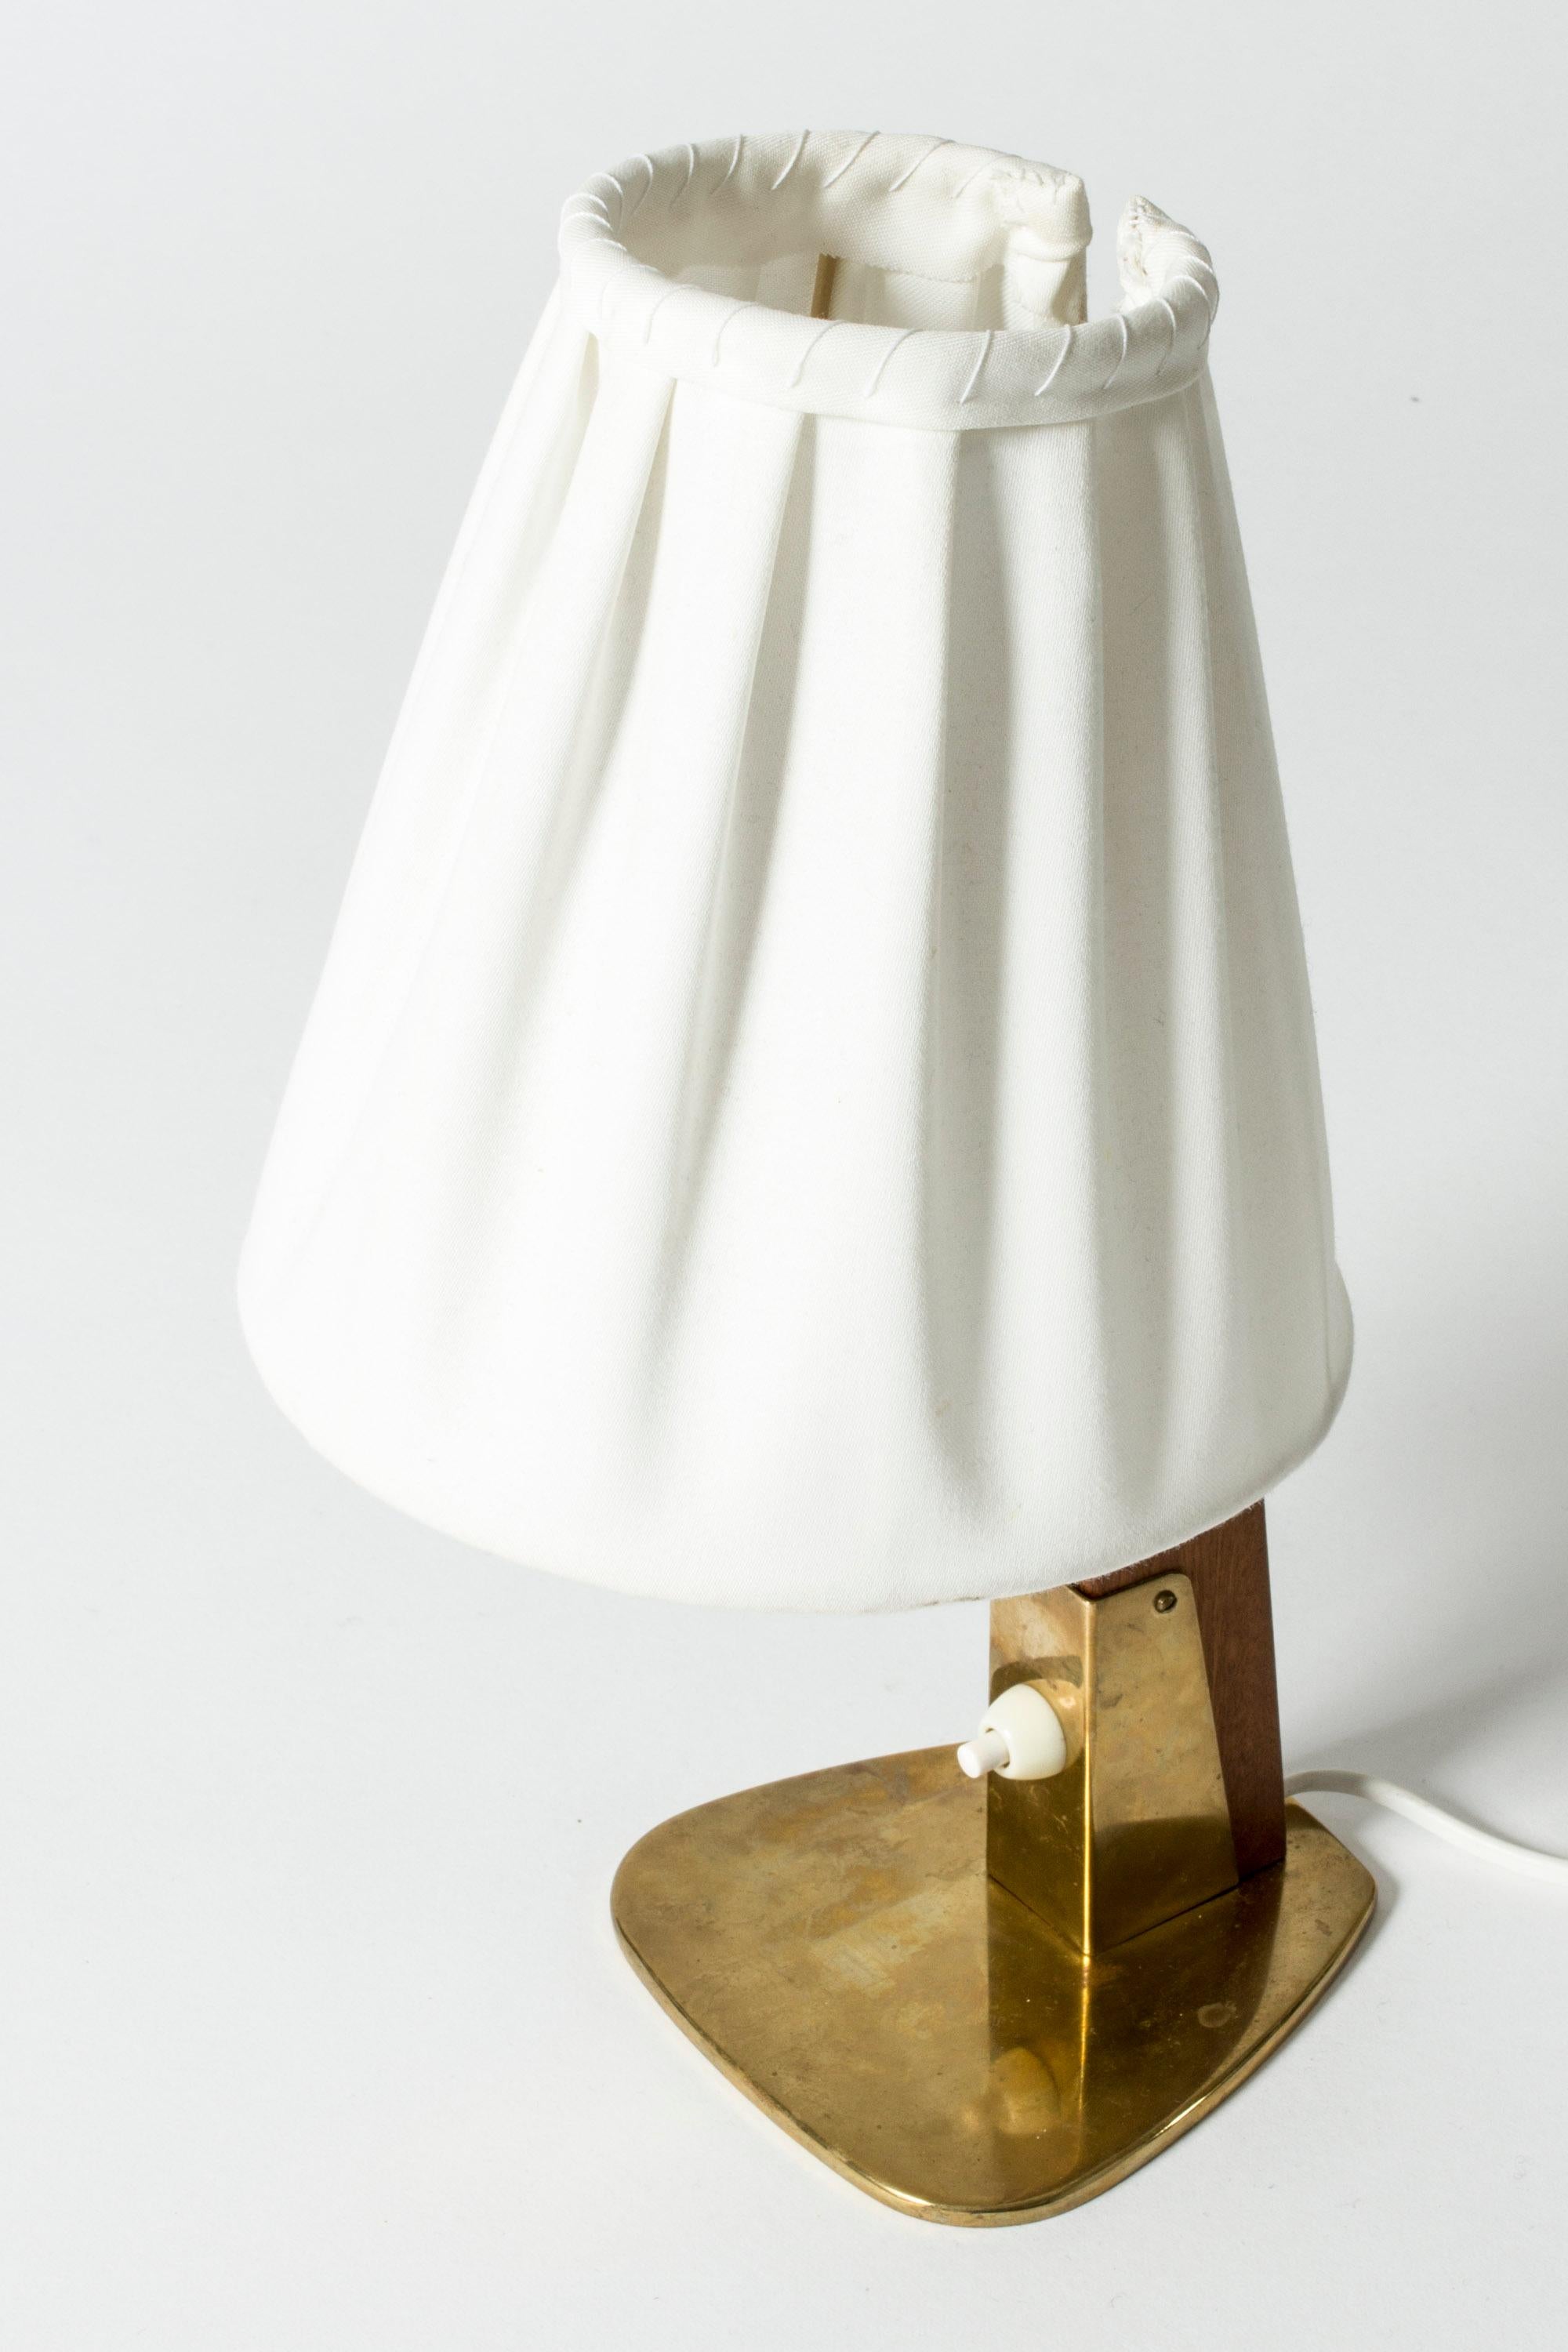 Swedish Table Lamp by Hans Bergström for ASEA, Sweden, 1950s